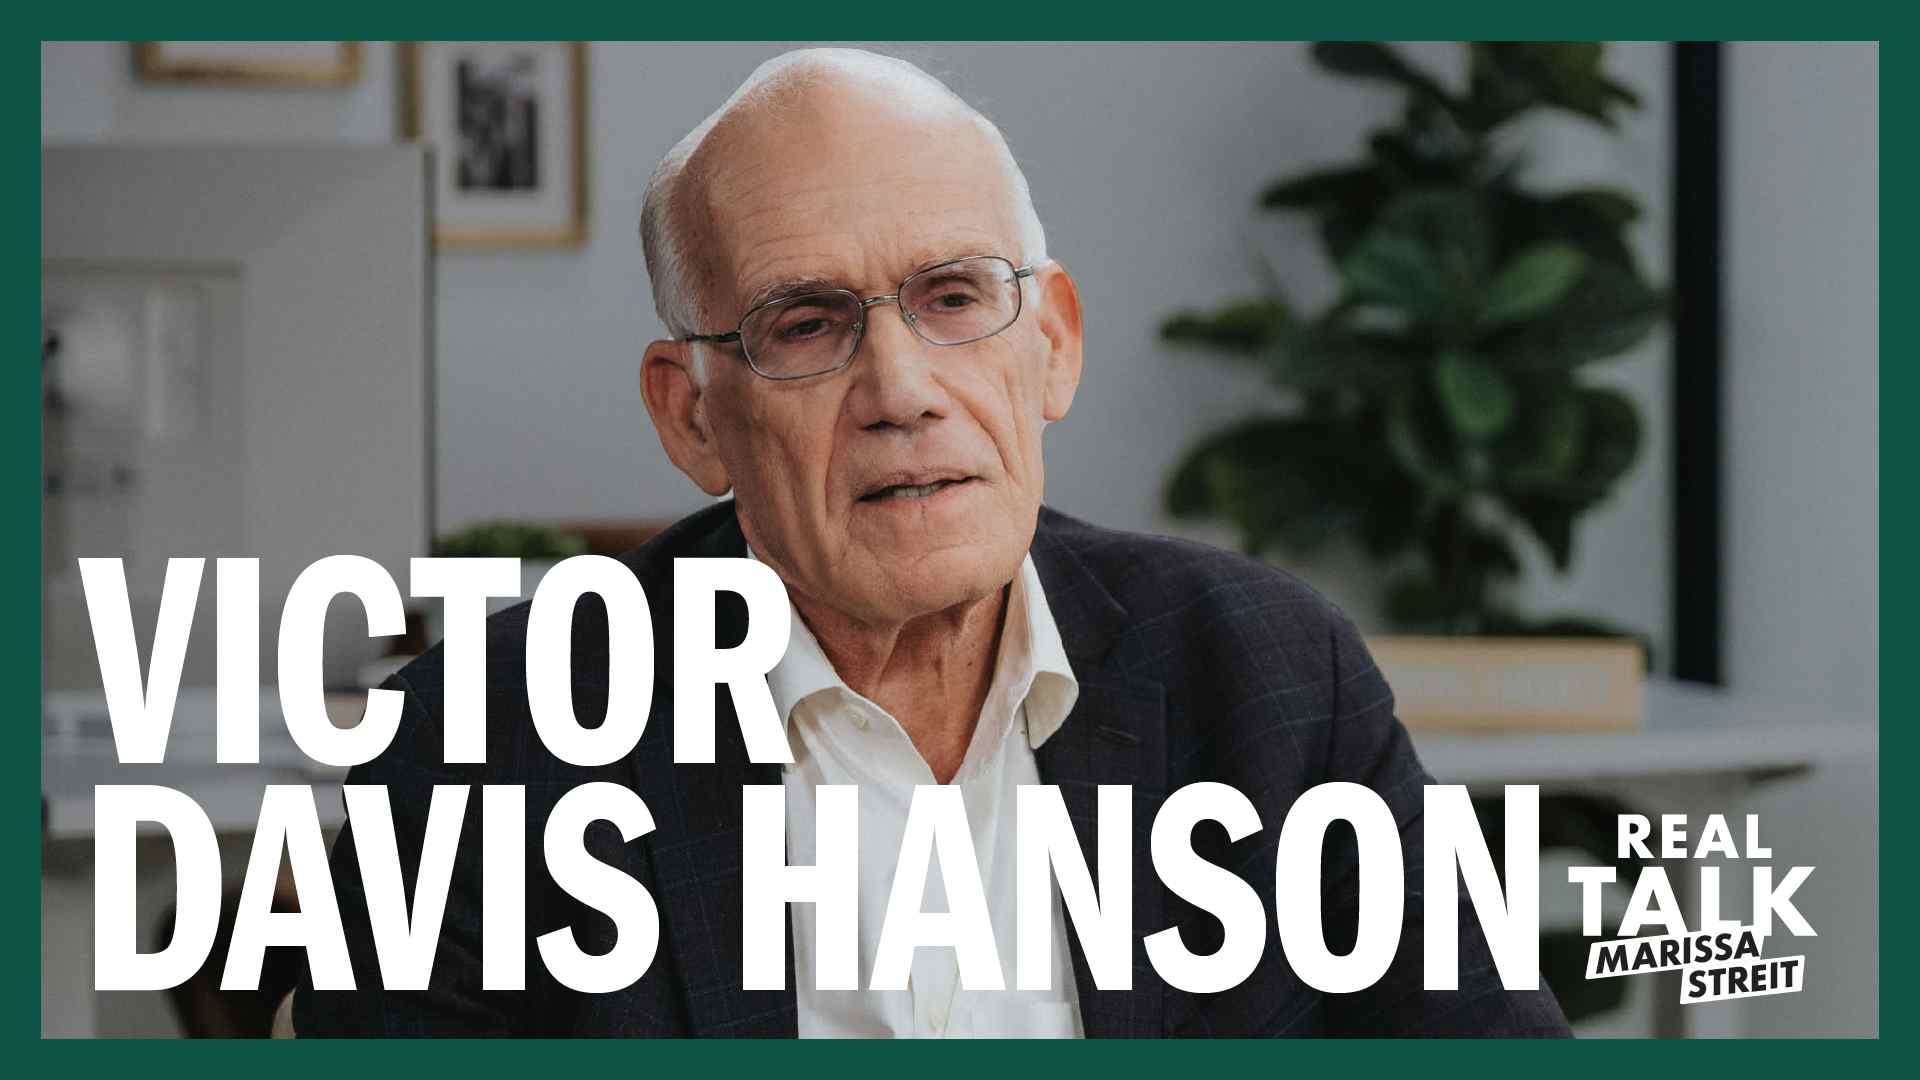 Victor Davis Hanson on Wars, Woke Culture, and the Fall of America’s Institutions